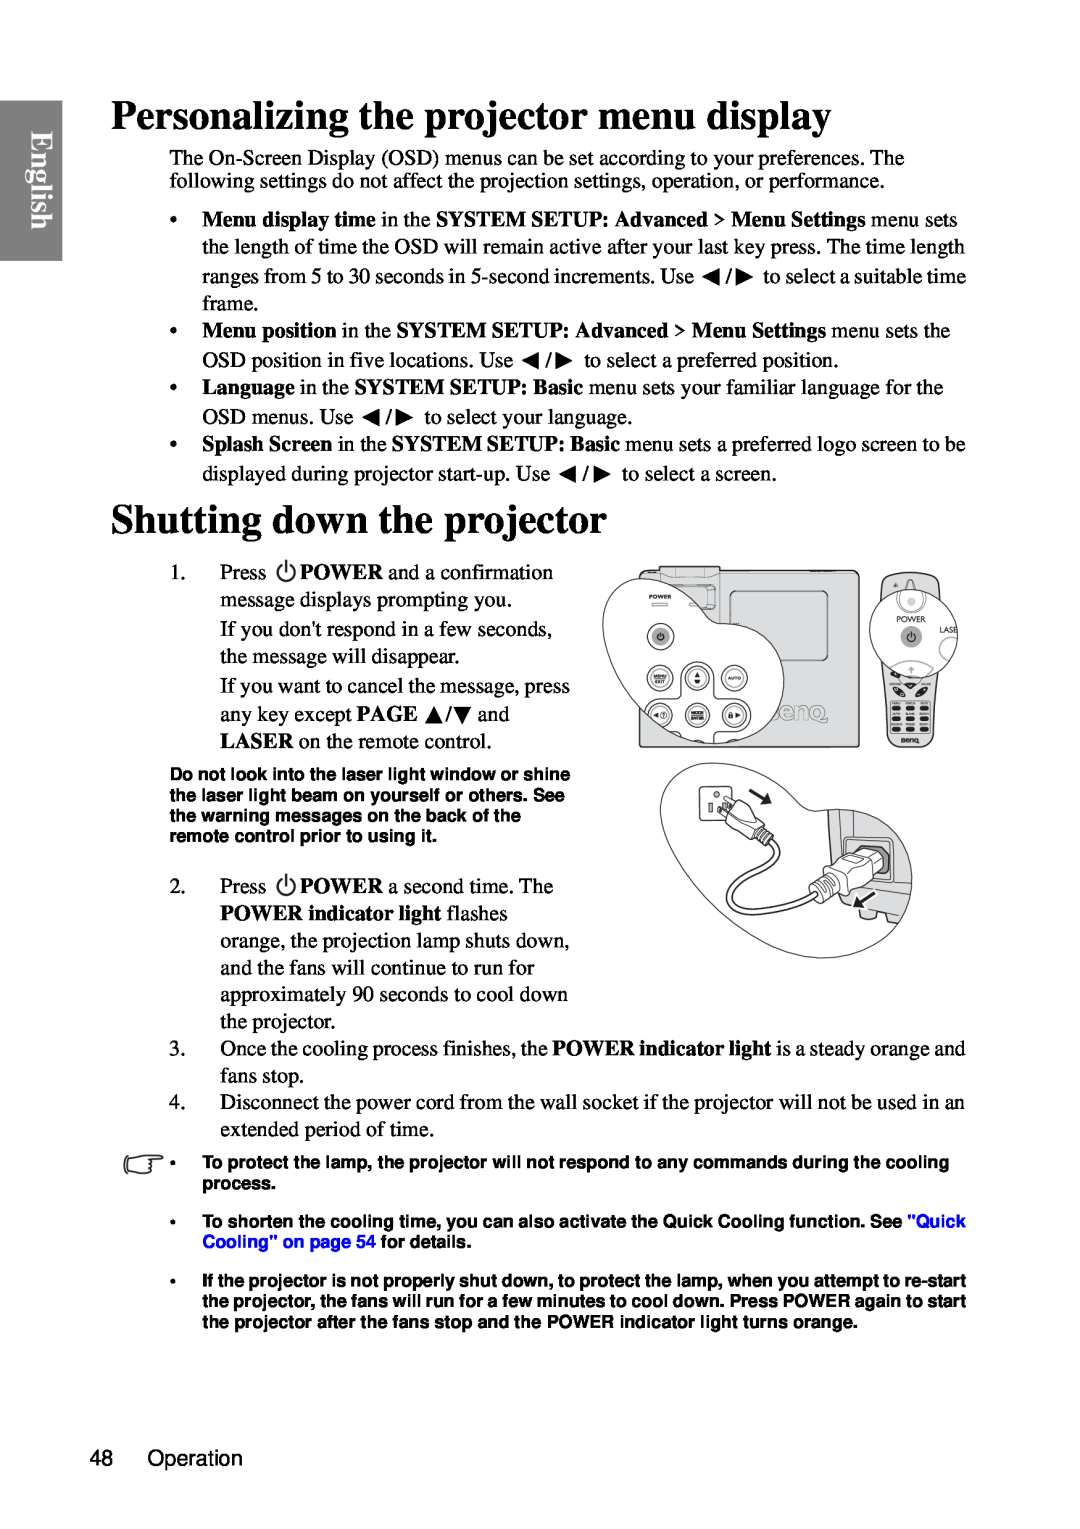 BenQ MP735, MP727 user manual Personalizing the projector menu display, Shutting down the projector, English 